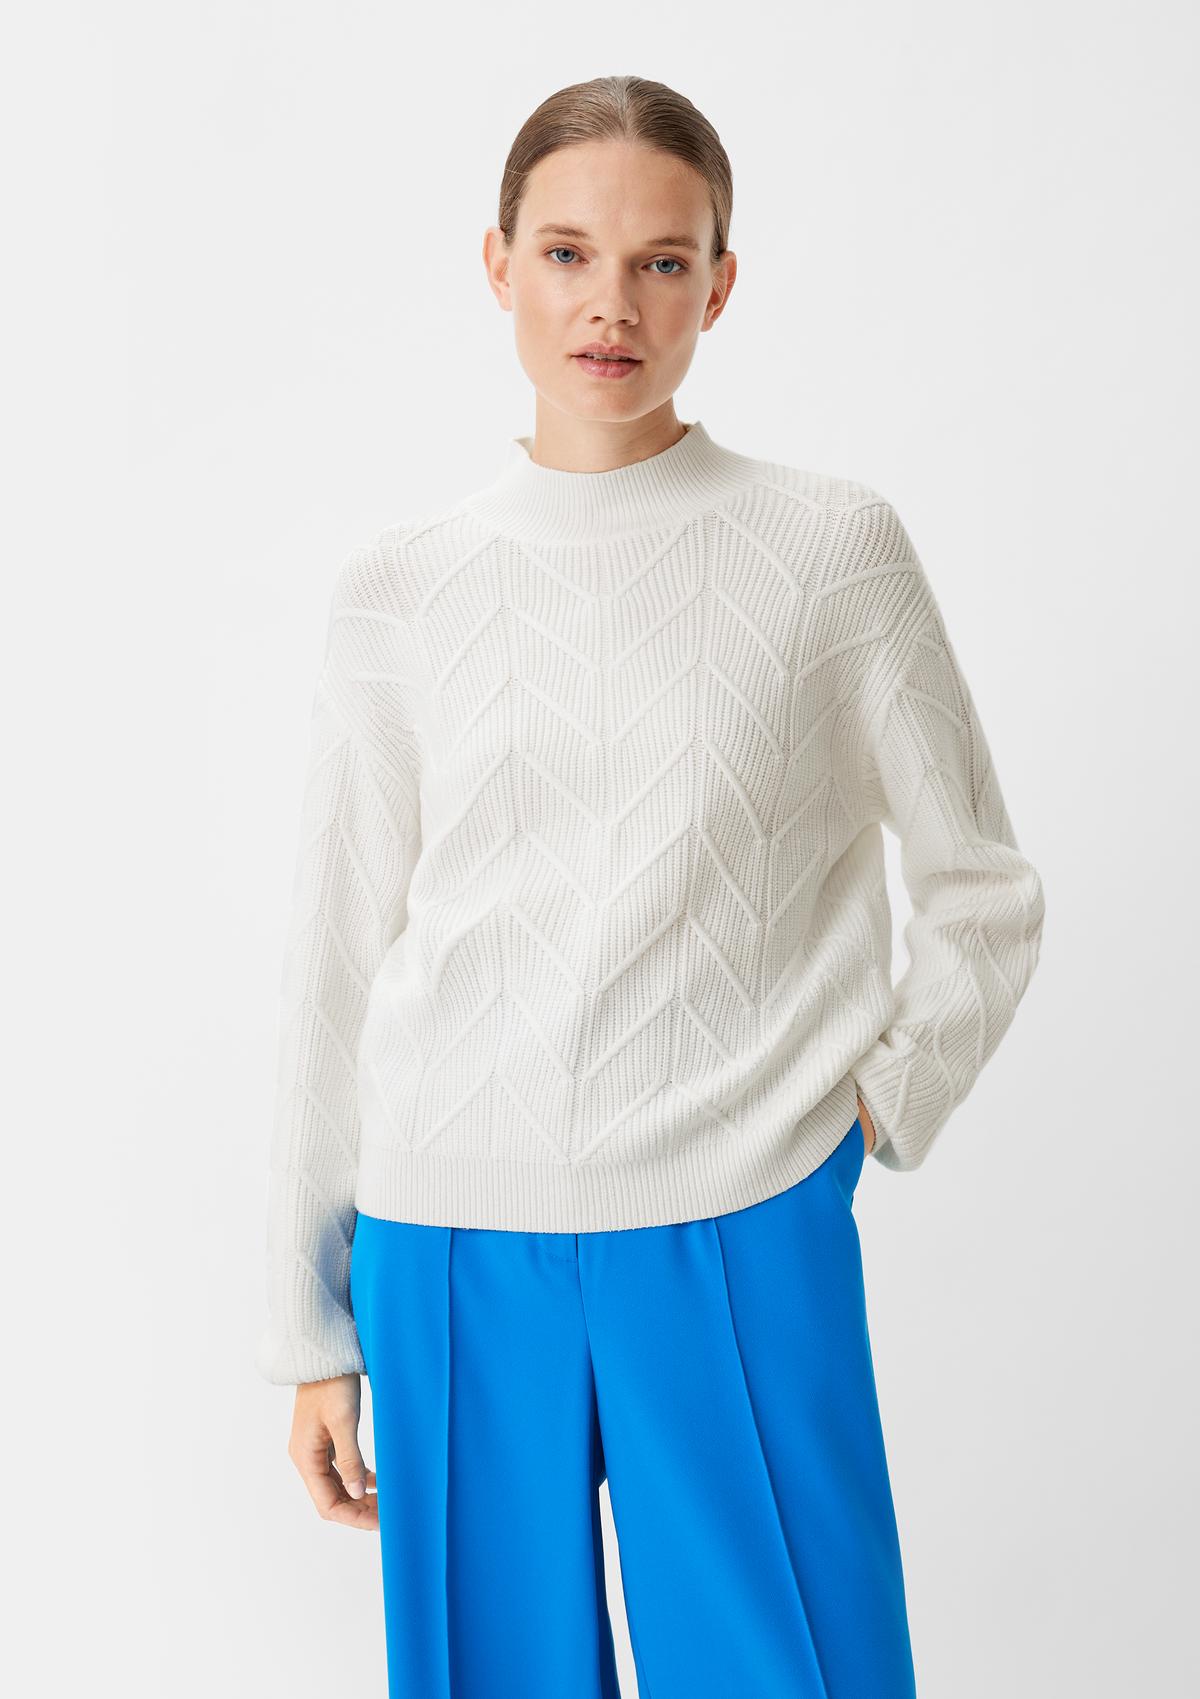 Soft jumper with a knit pattern